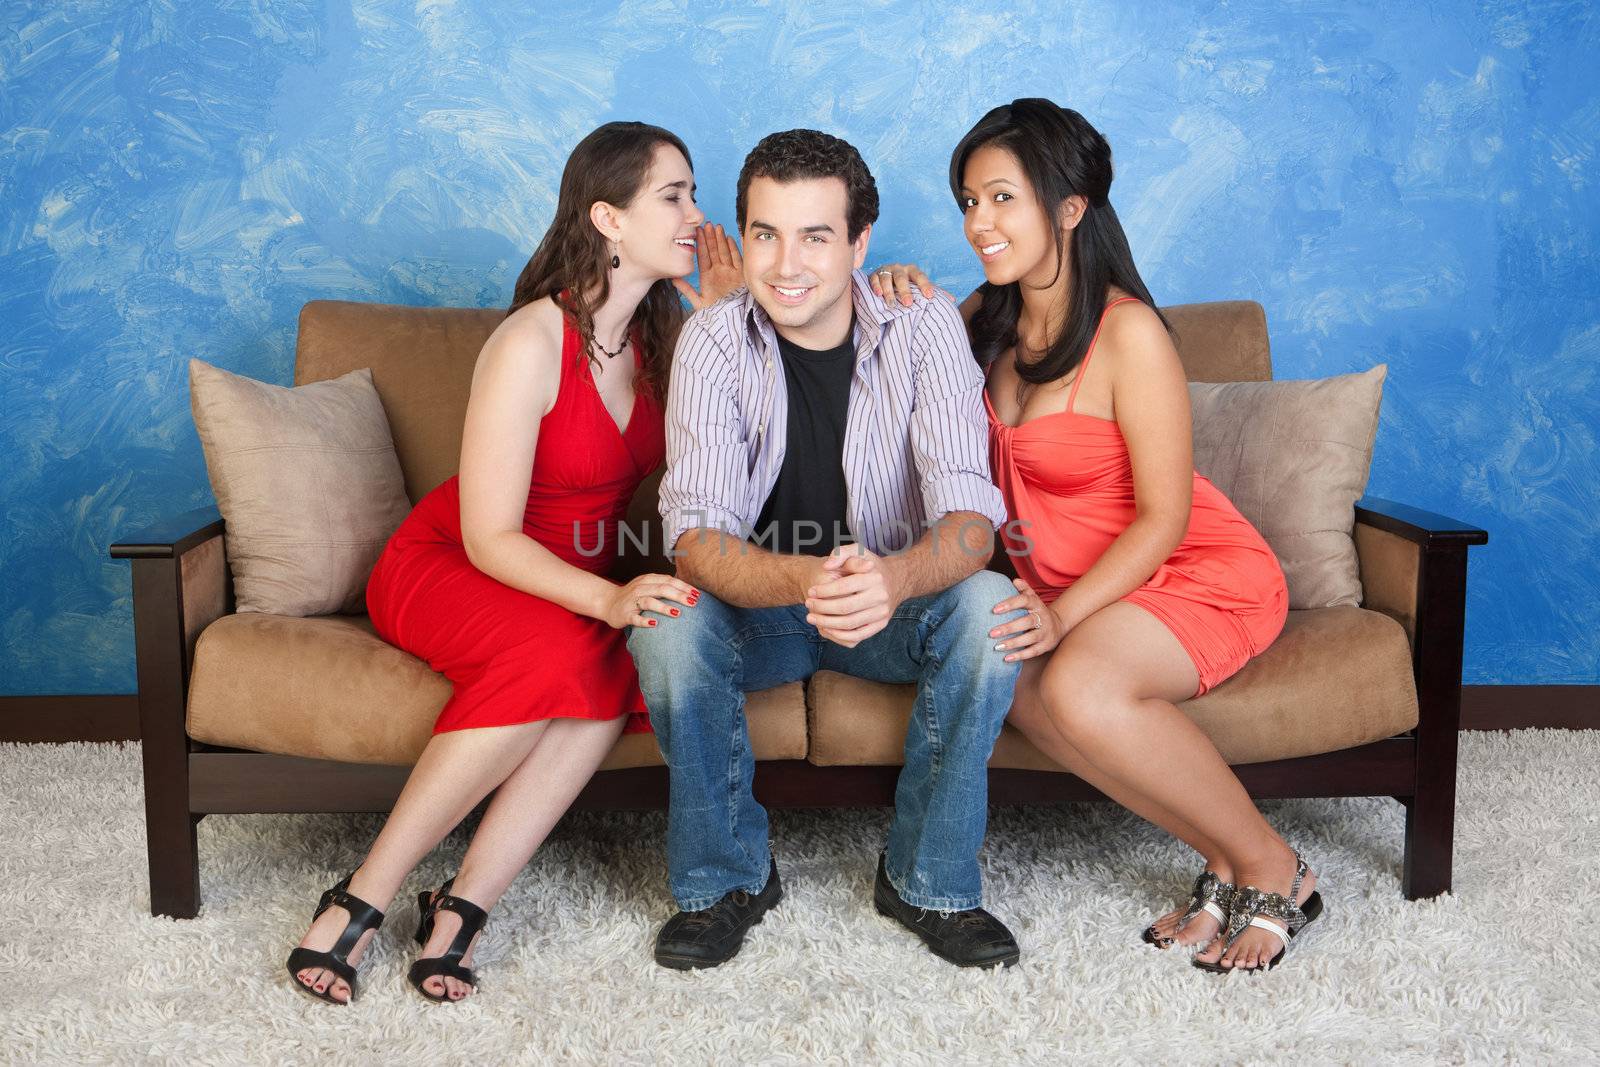 Two pretty women whisper and flirt with handsome man